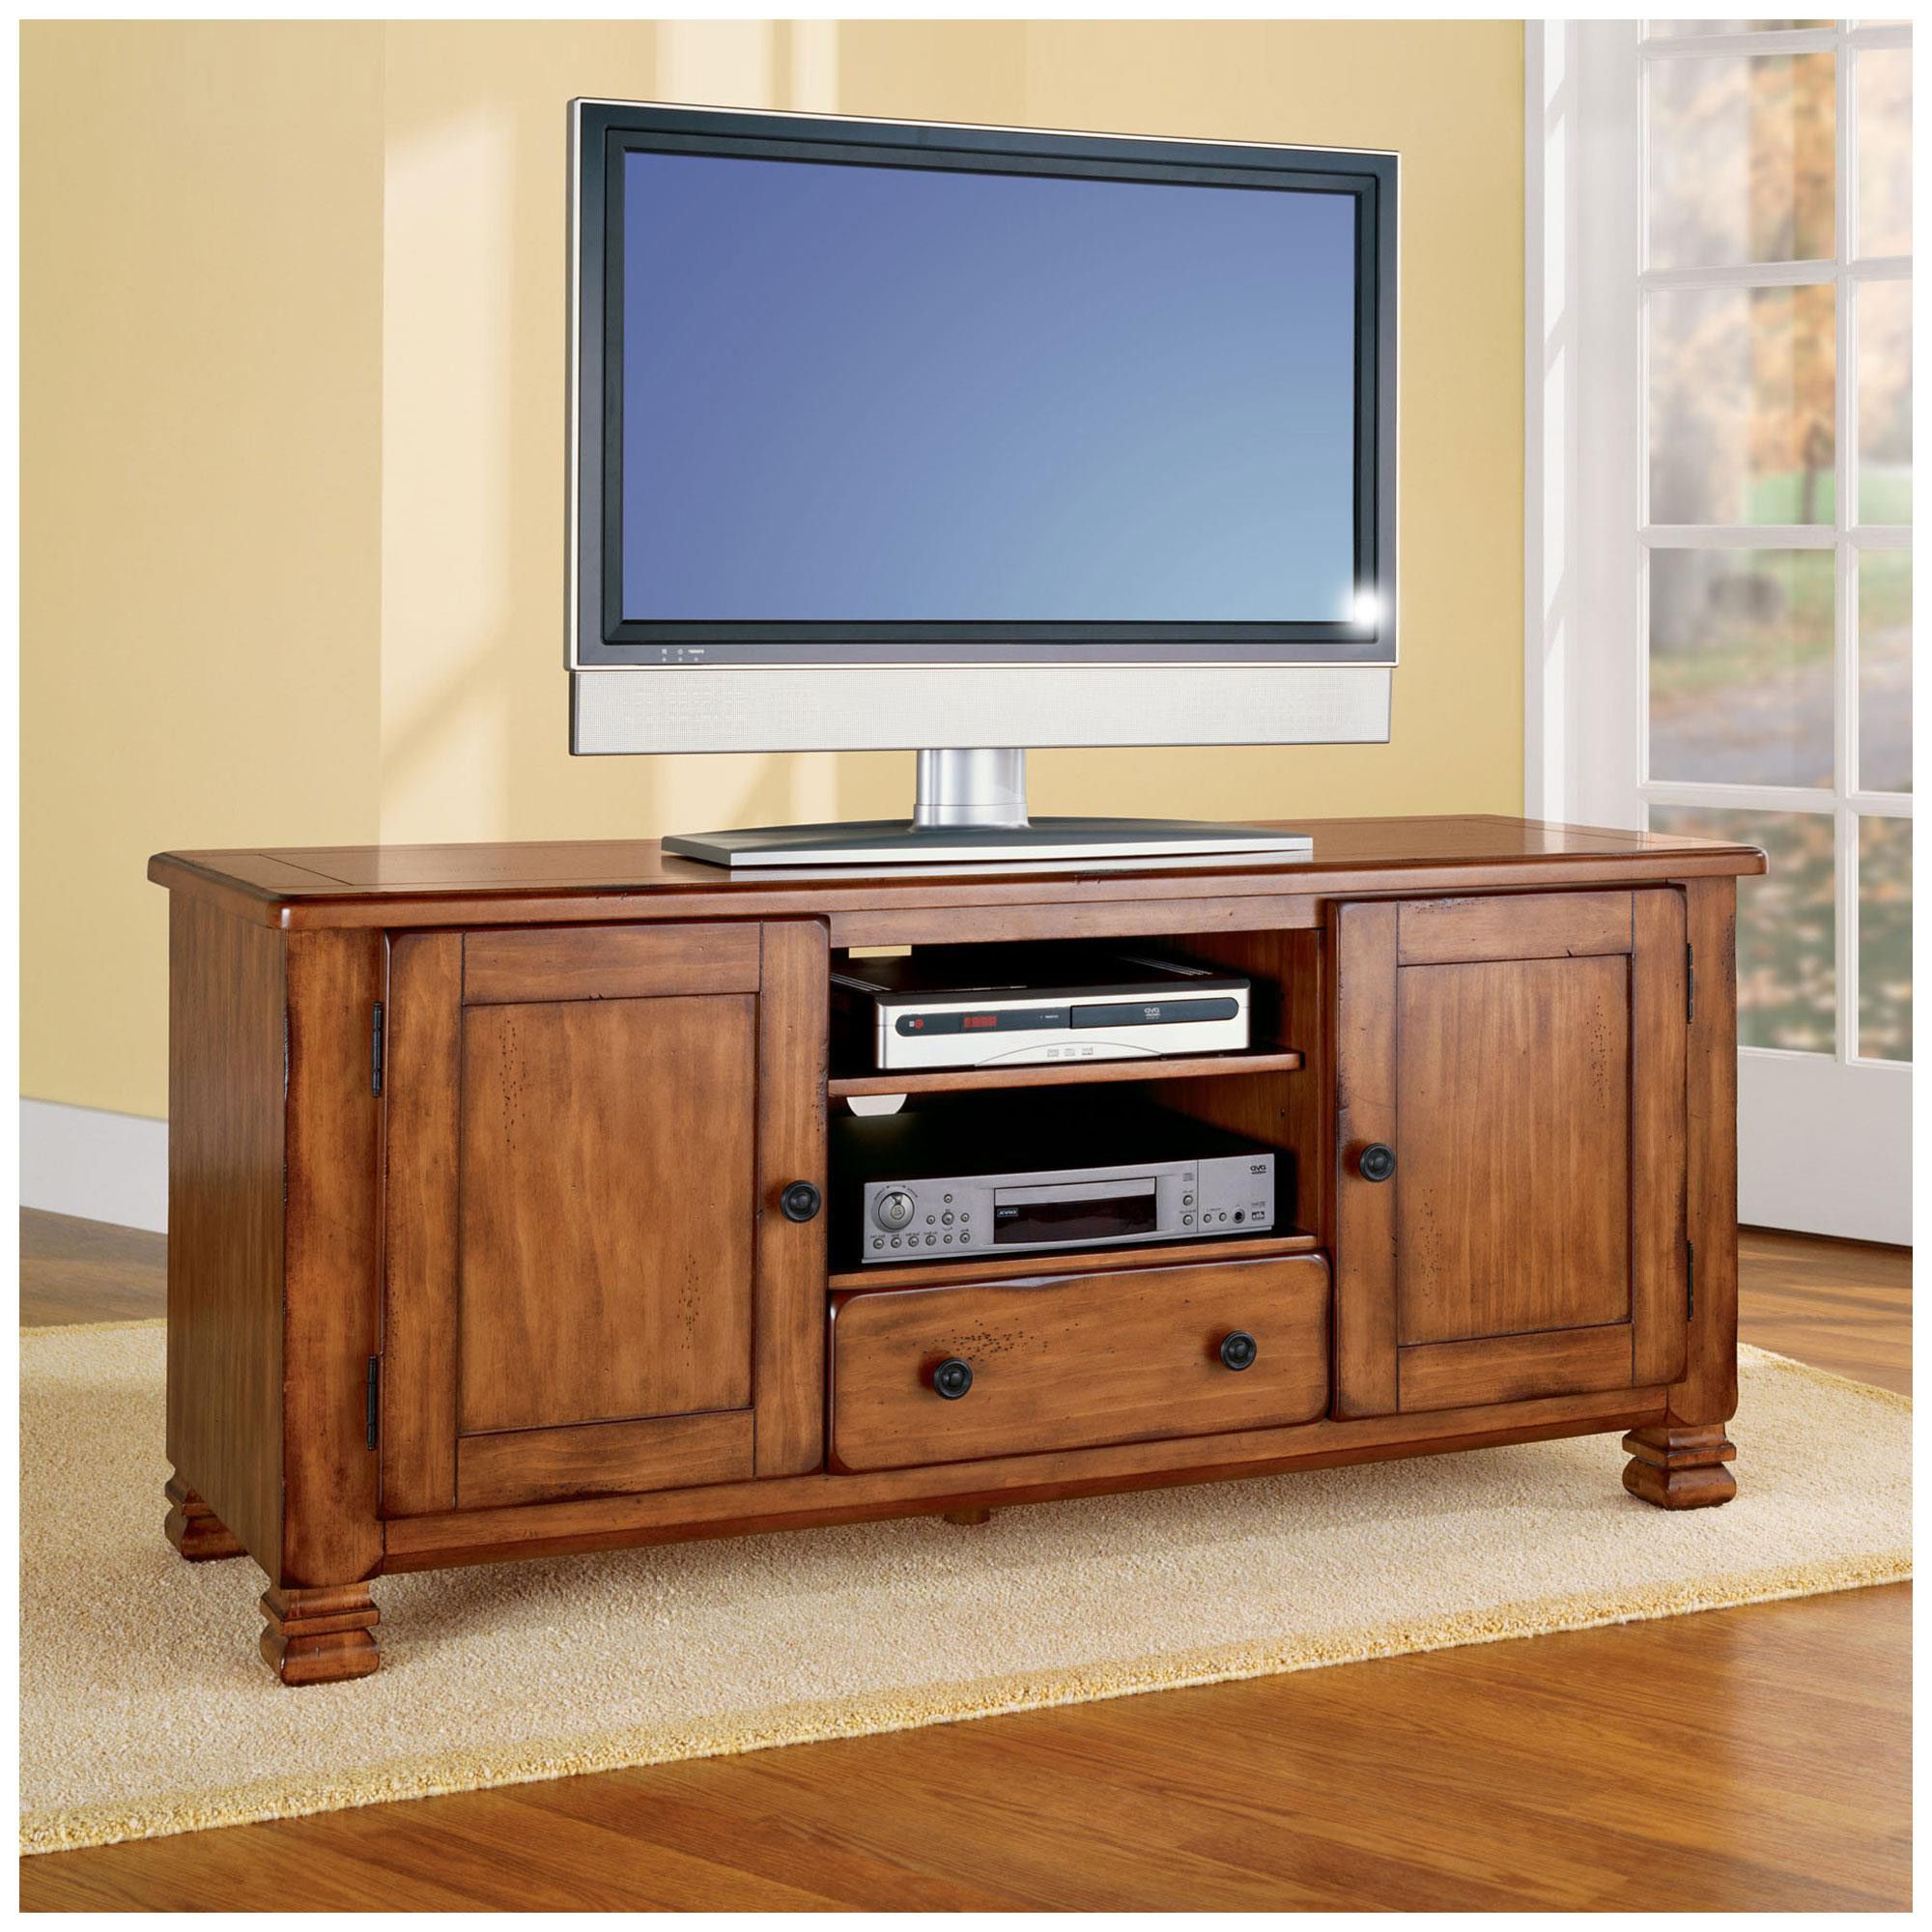 Wooden Tv Stands For 50 Inch Tv With Regard To Popular Amish Corner Tv Stand Solid Wood Console Mission Style Stands For (View 3 of 20)